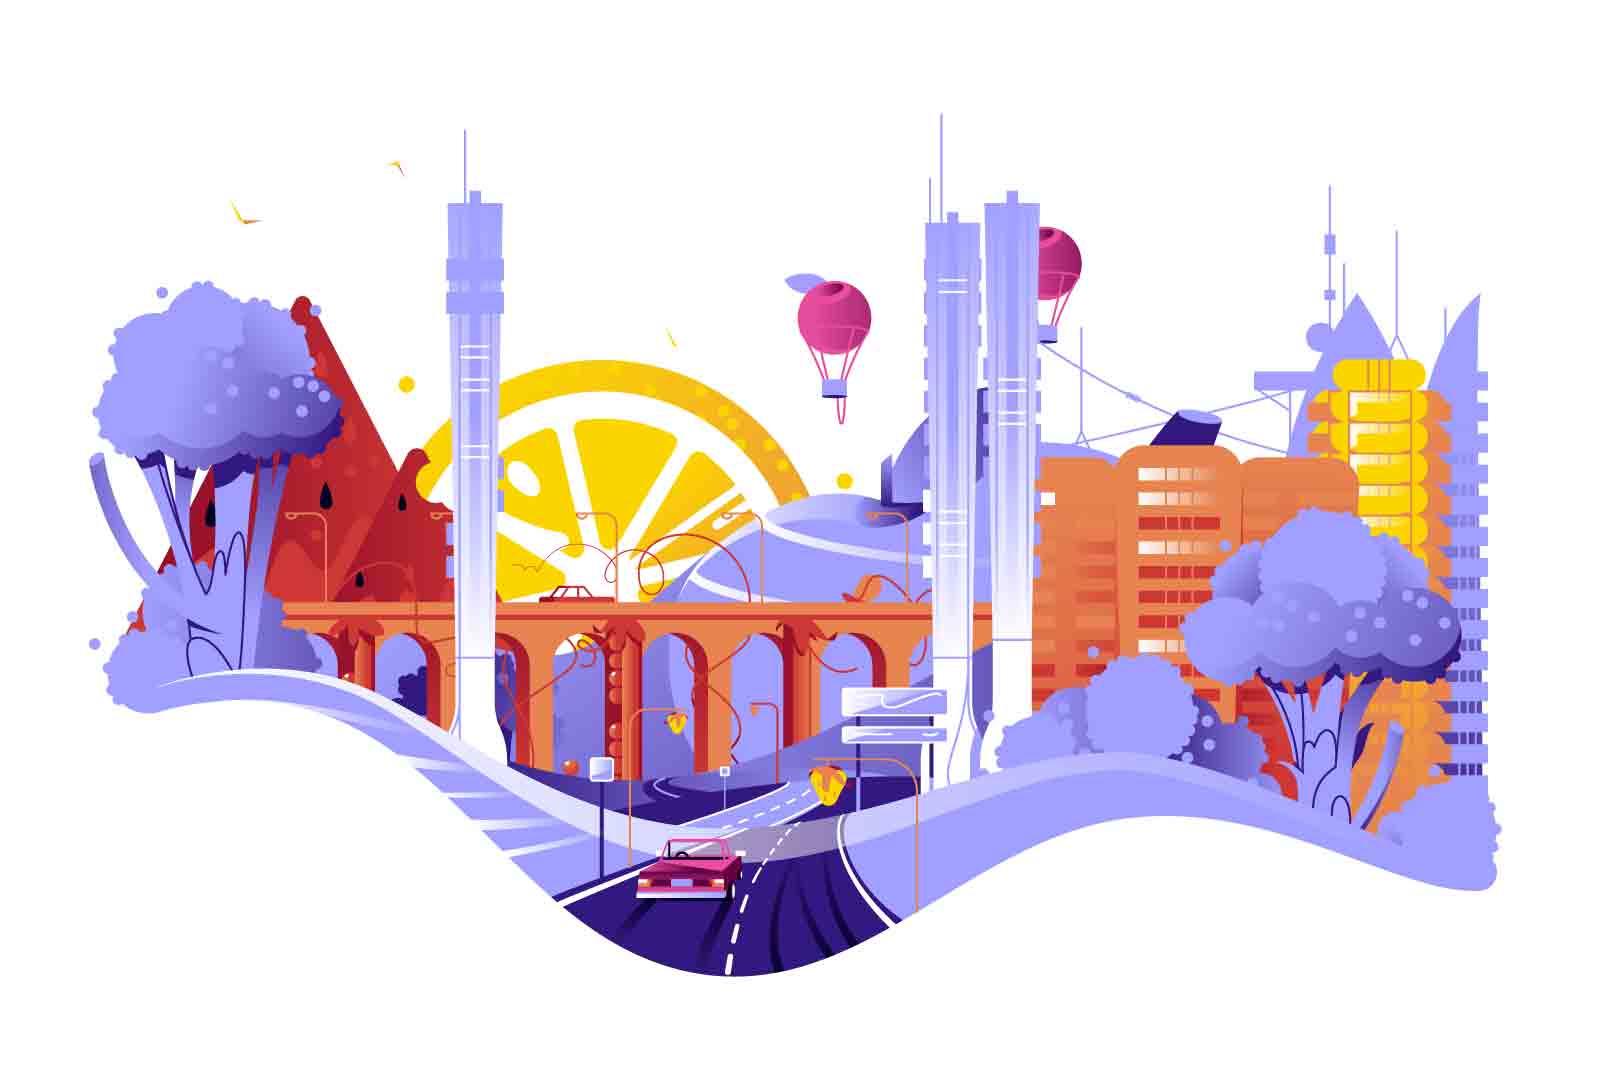 City of fruits and vegetables vector illustration. Sun, trees and air balloon in shape of orange, broccoli and apples. Fabulous city